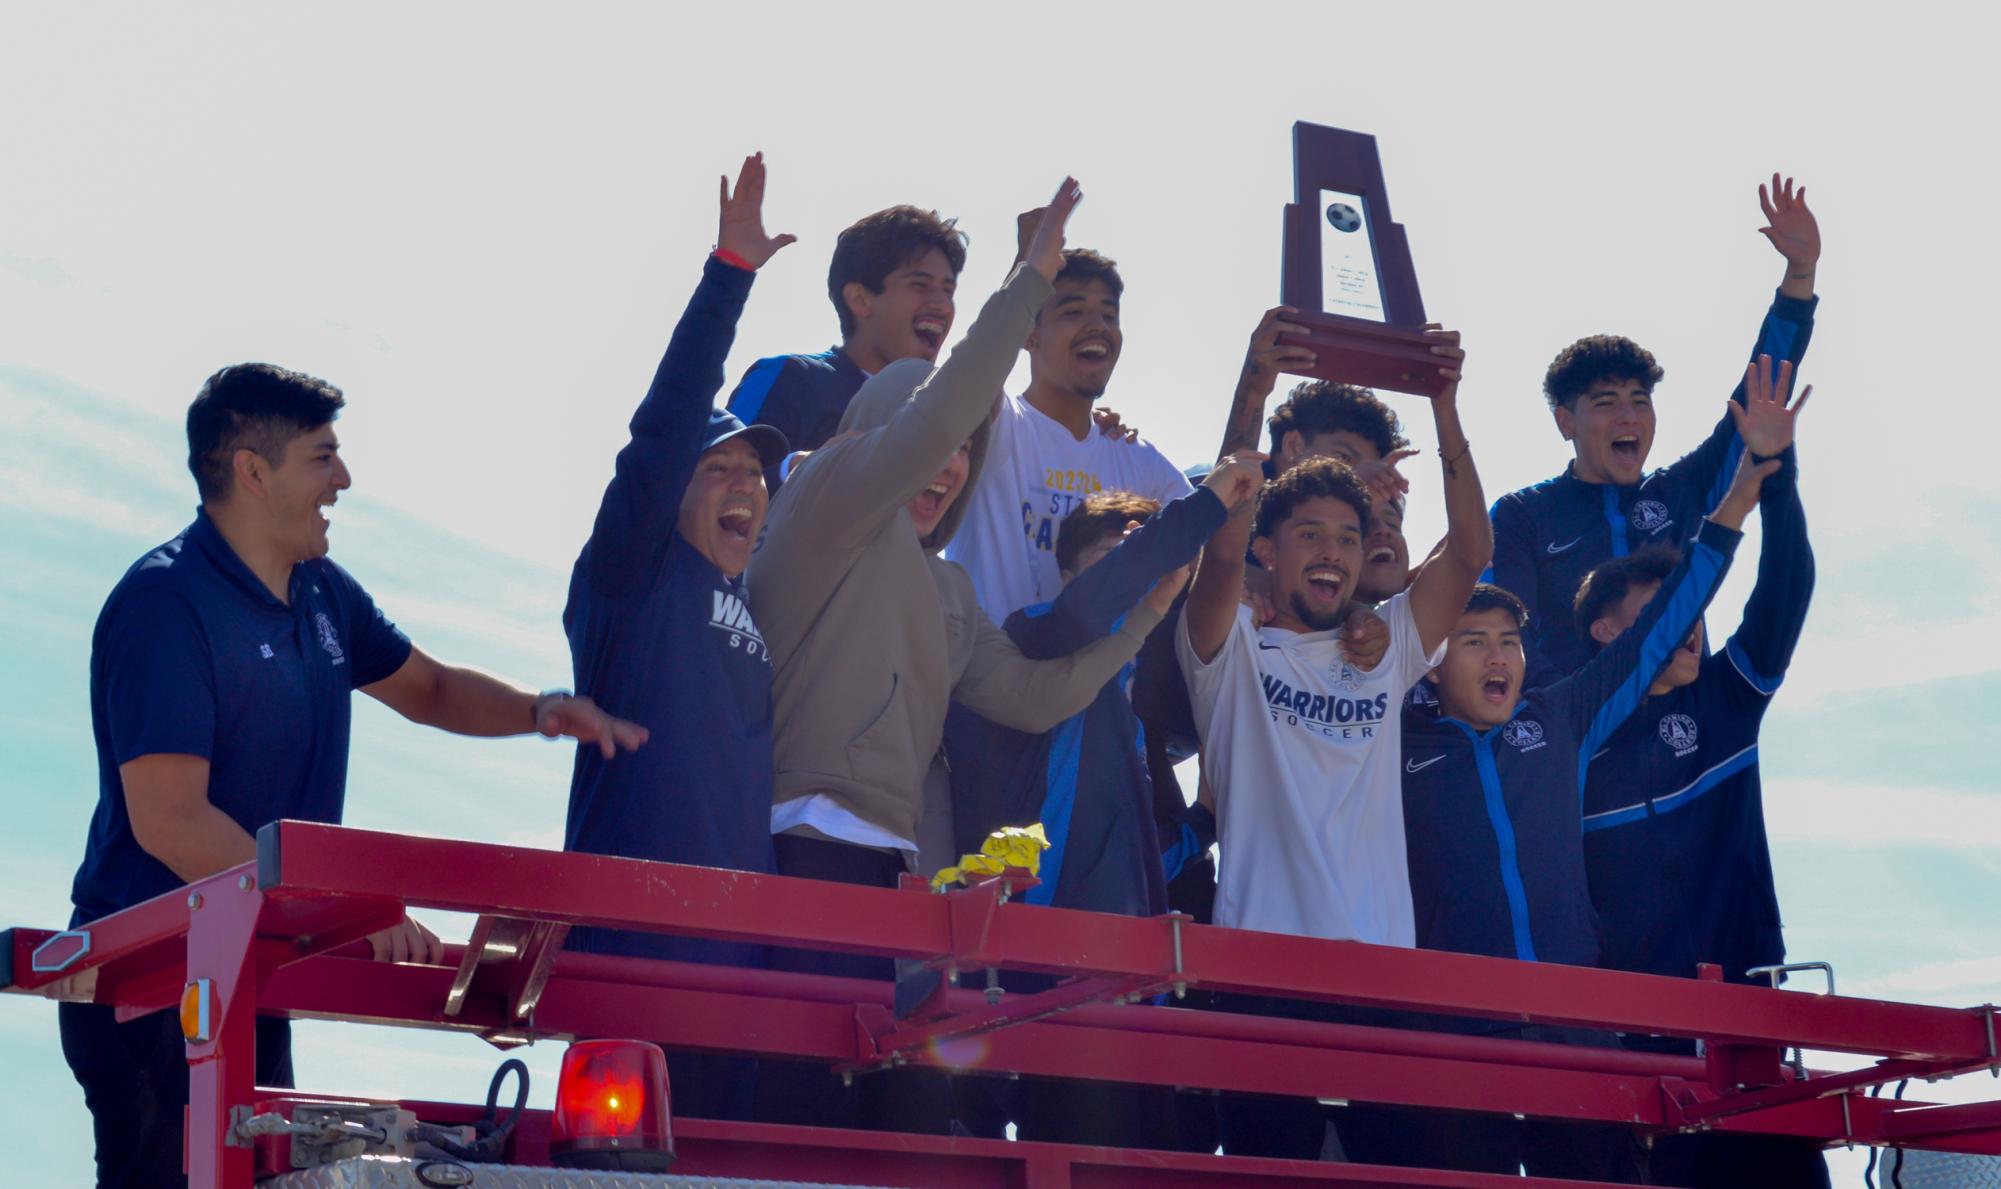 Players from El Camino Colleges national and state championship-winning soccer team celebrate as they hold up the state championship trophy on Thursday, Feb. 15, during the championship parade held on campus. (Caleb Smith | The Union)